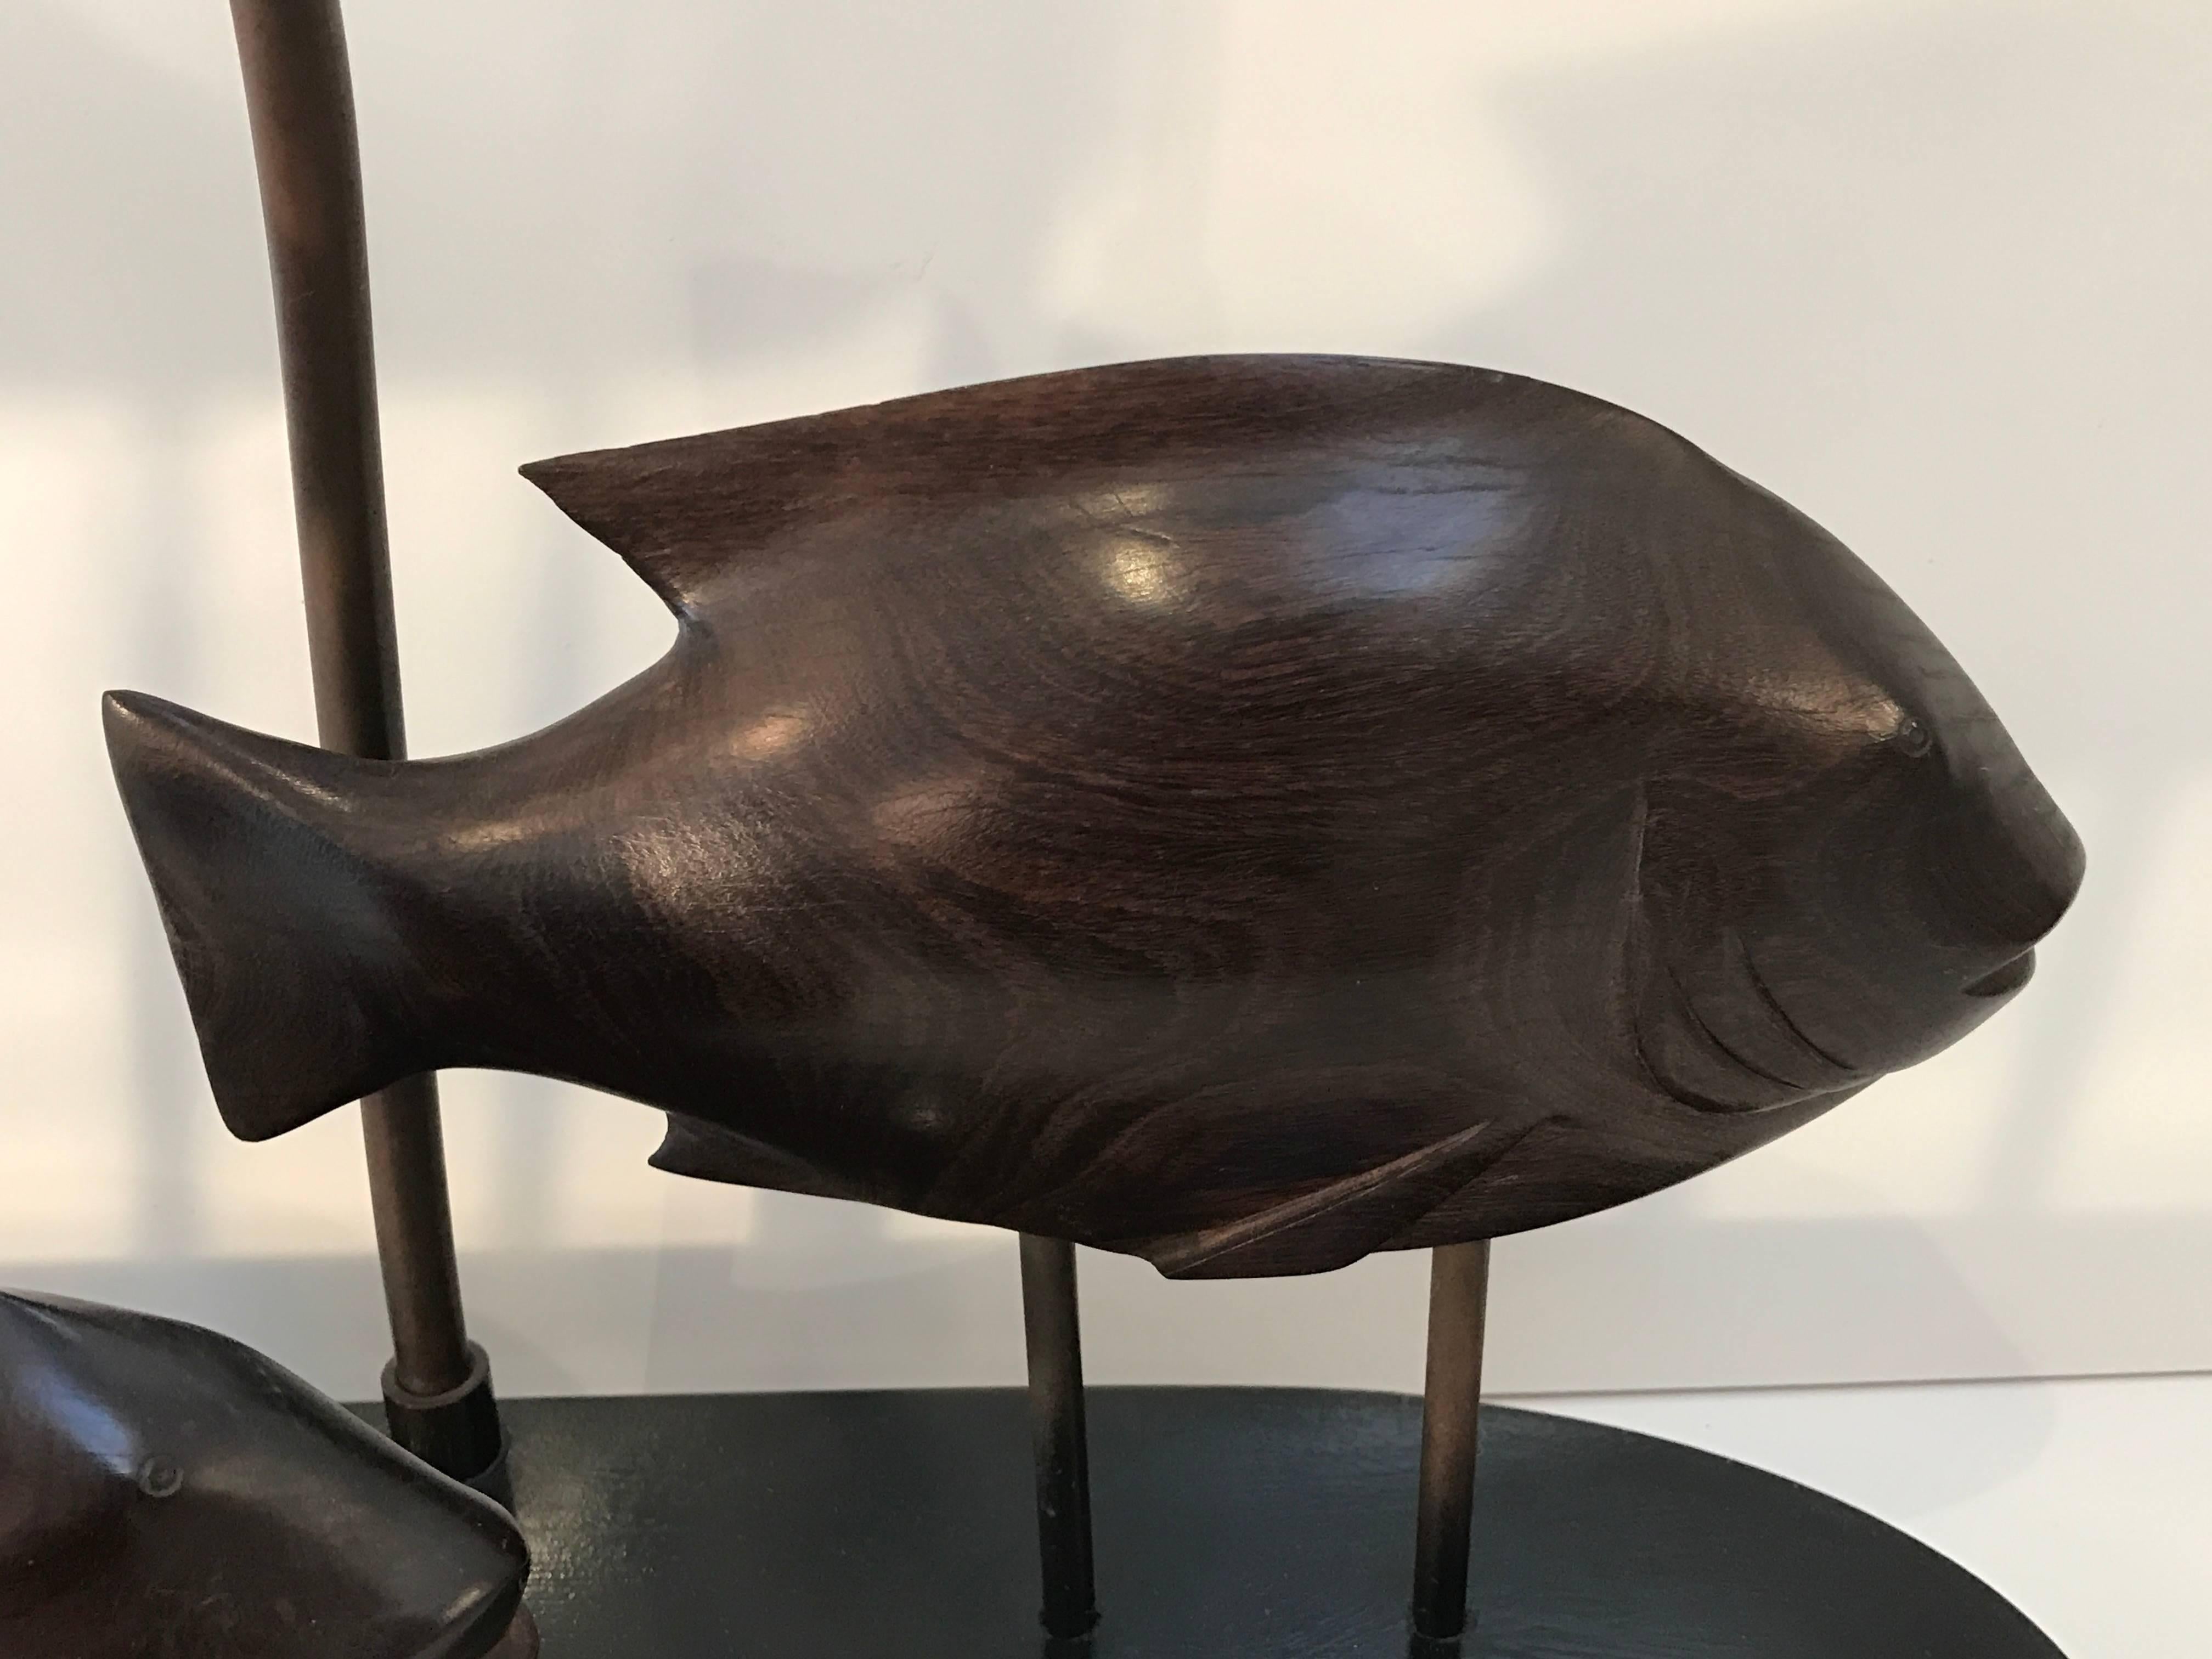 French Modern School of Fish Lamp, three well carved rosewood graduating (measures: largest 11" W, medium 10" W, small 7.5" W) fish museum mounted on an oval ebonized base. Fitted with two bulbs. Shade is not included, for display